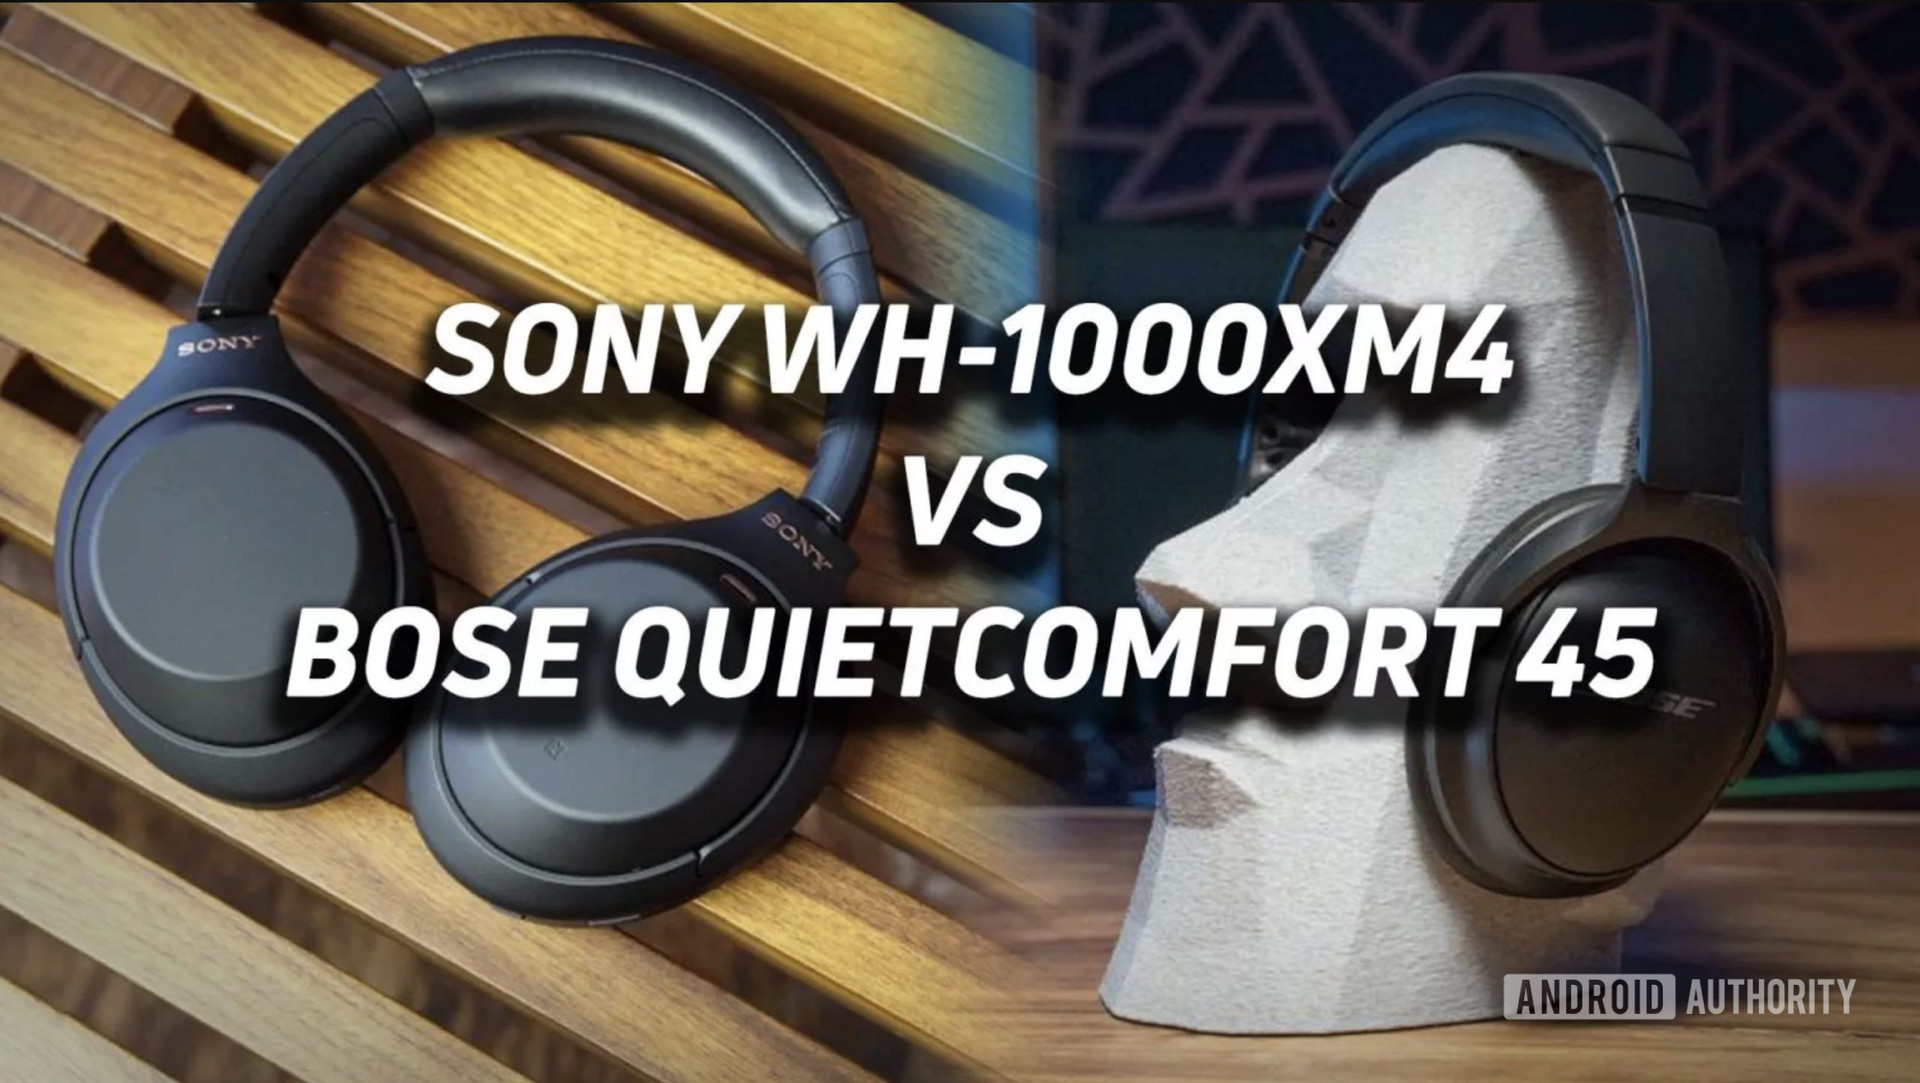 Bose Quietcomfort 45 vs Sony WH-1000XM4: Which should you buy?